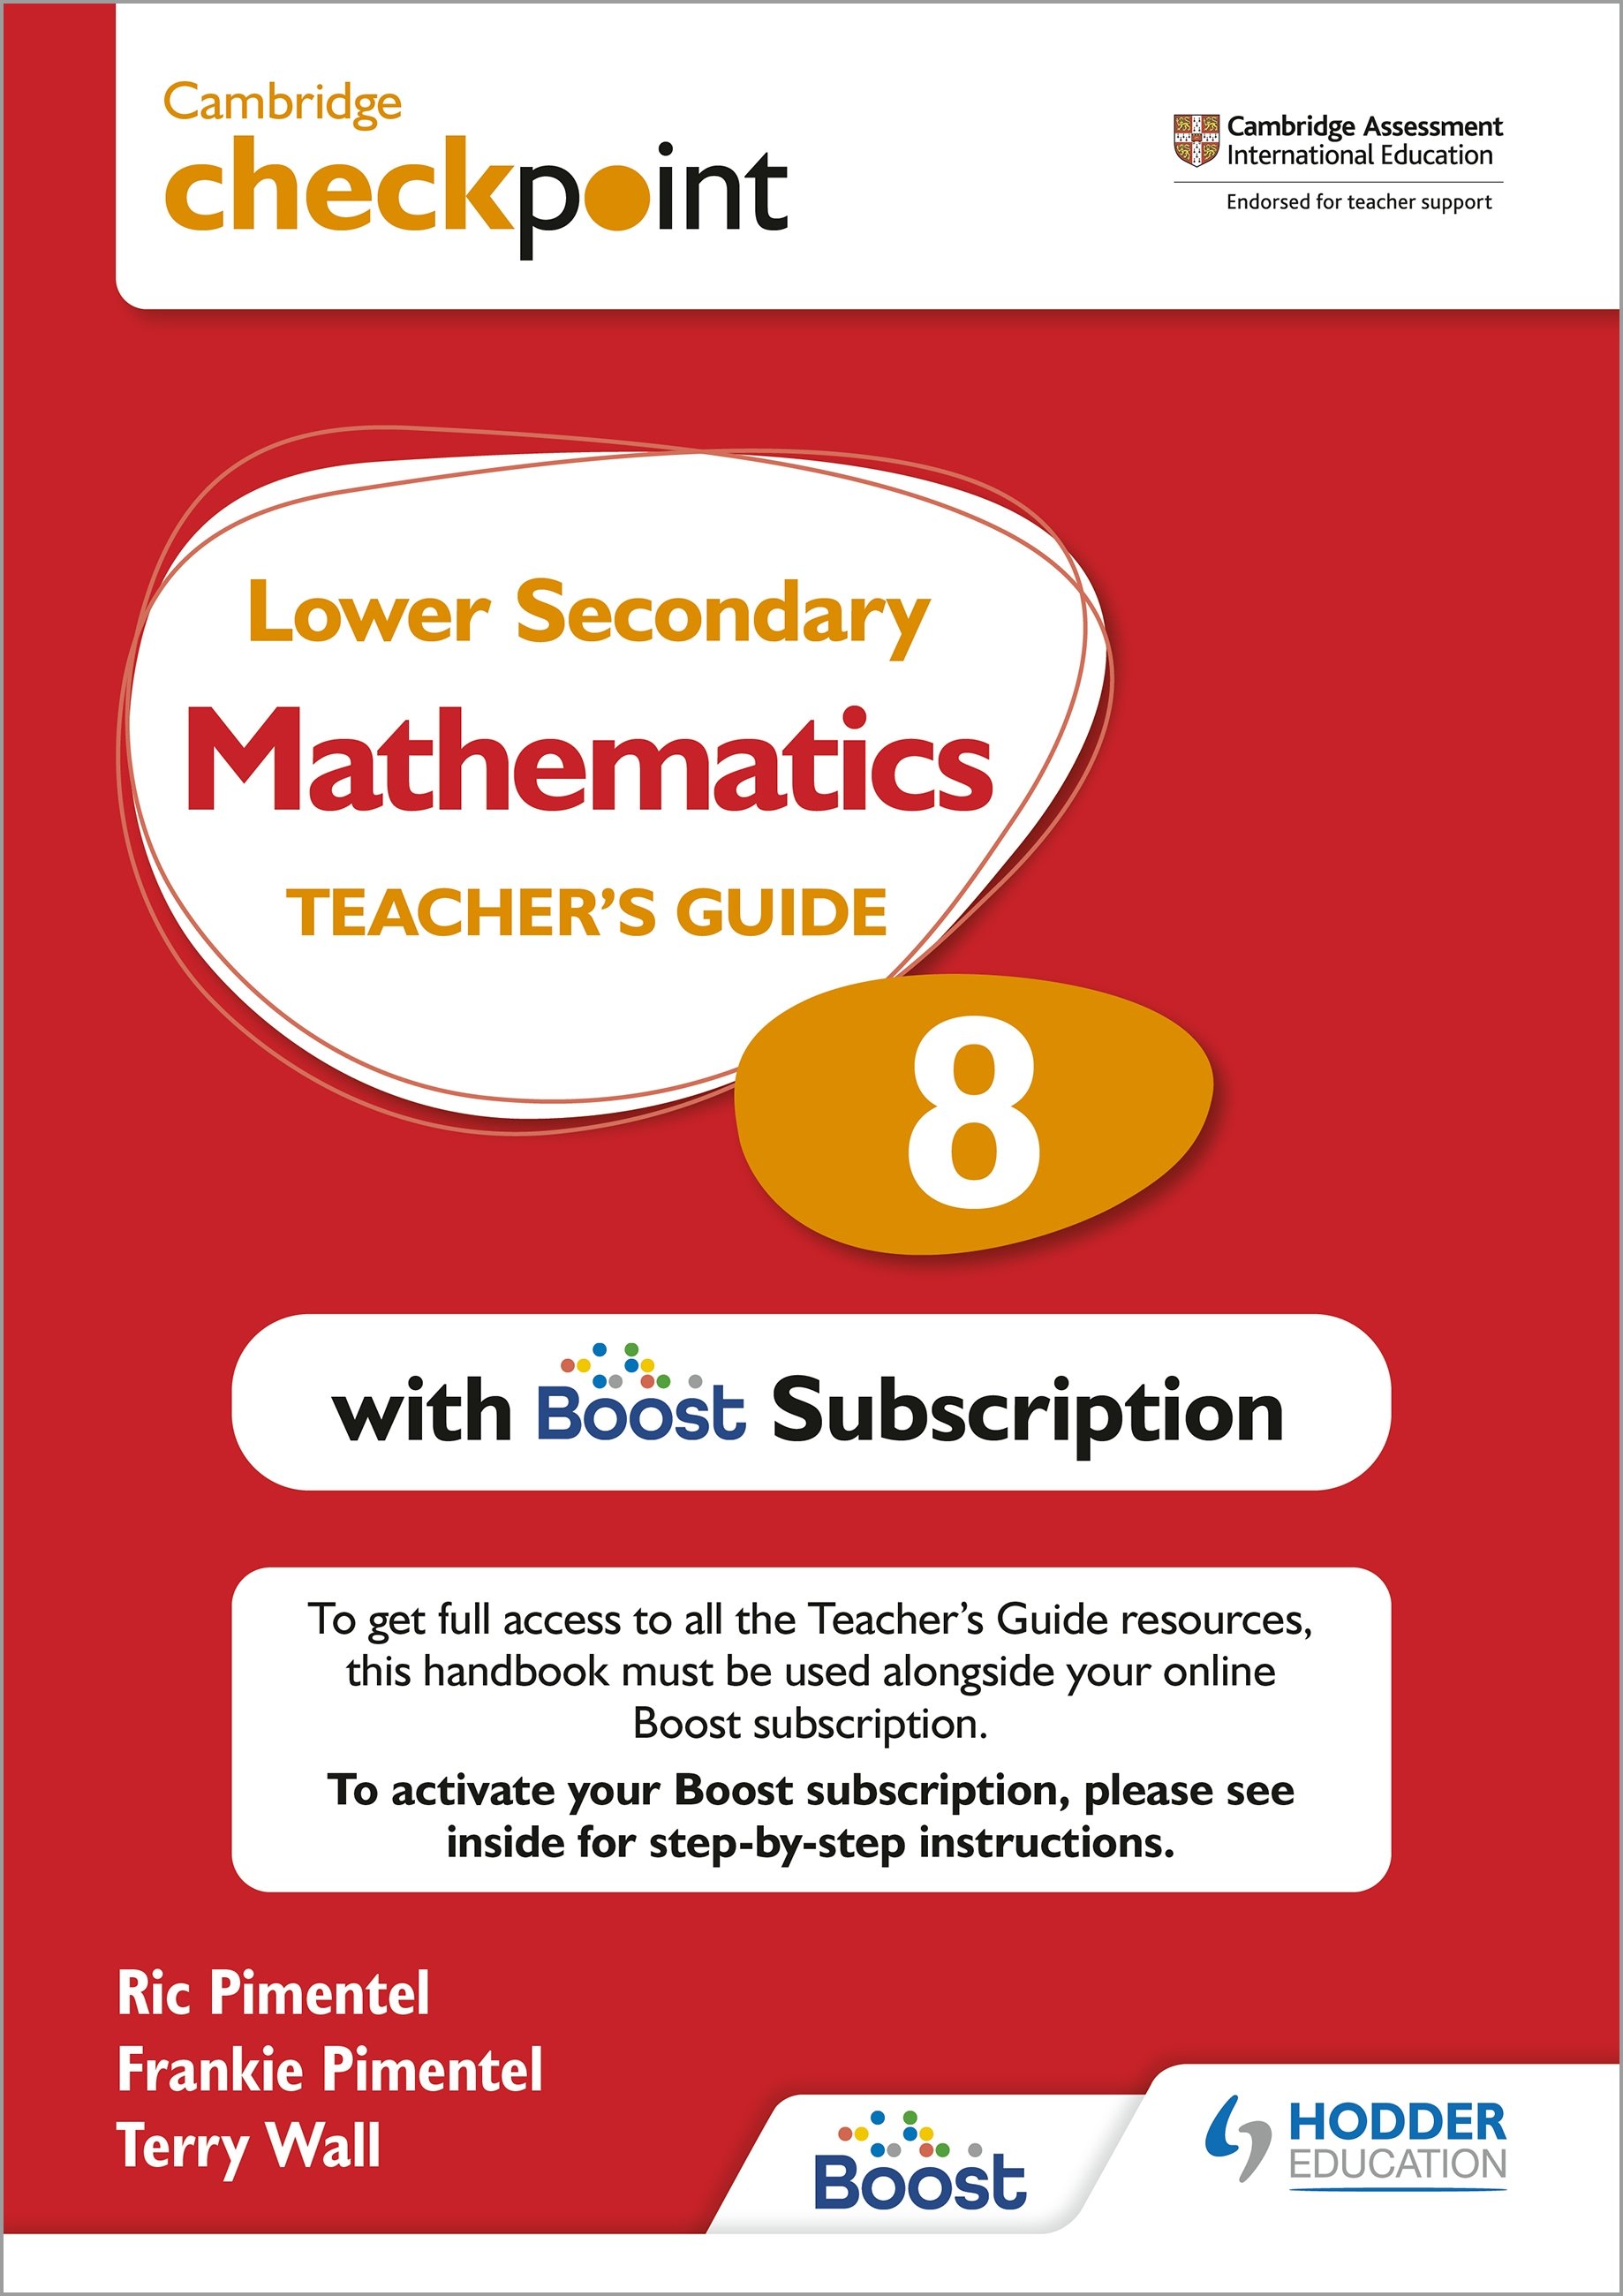 Hodder Cambridge Checkpoint Lower Secondary Mathematics Teacher's Guide 8 with Boost Subscription - By Frankie Pimentel, Ric Pimentel, Terry Wall